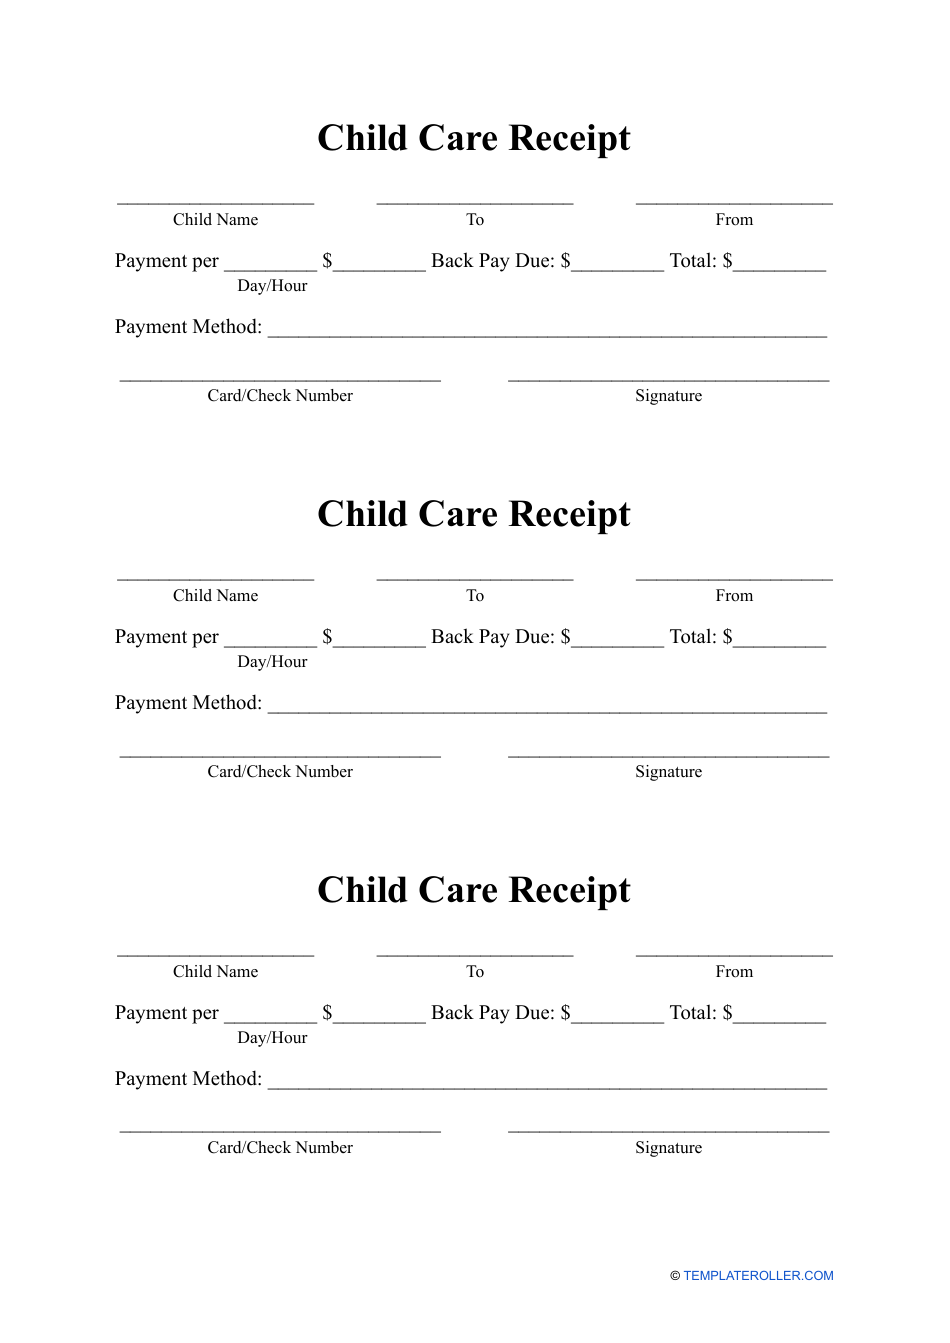 Child Care Receipt Template, Page 1